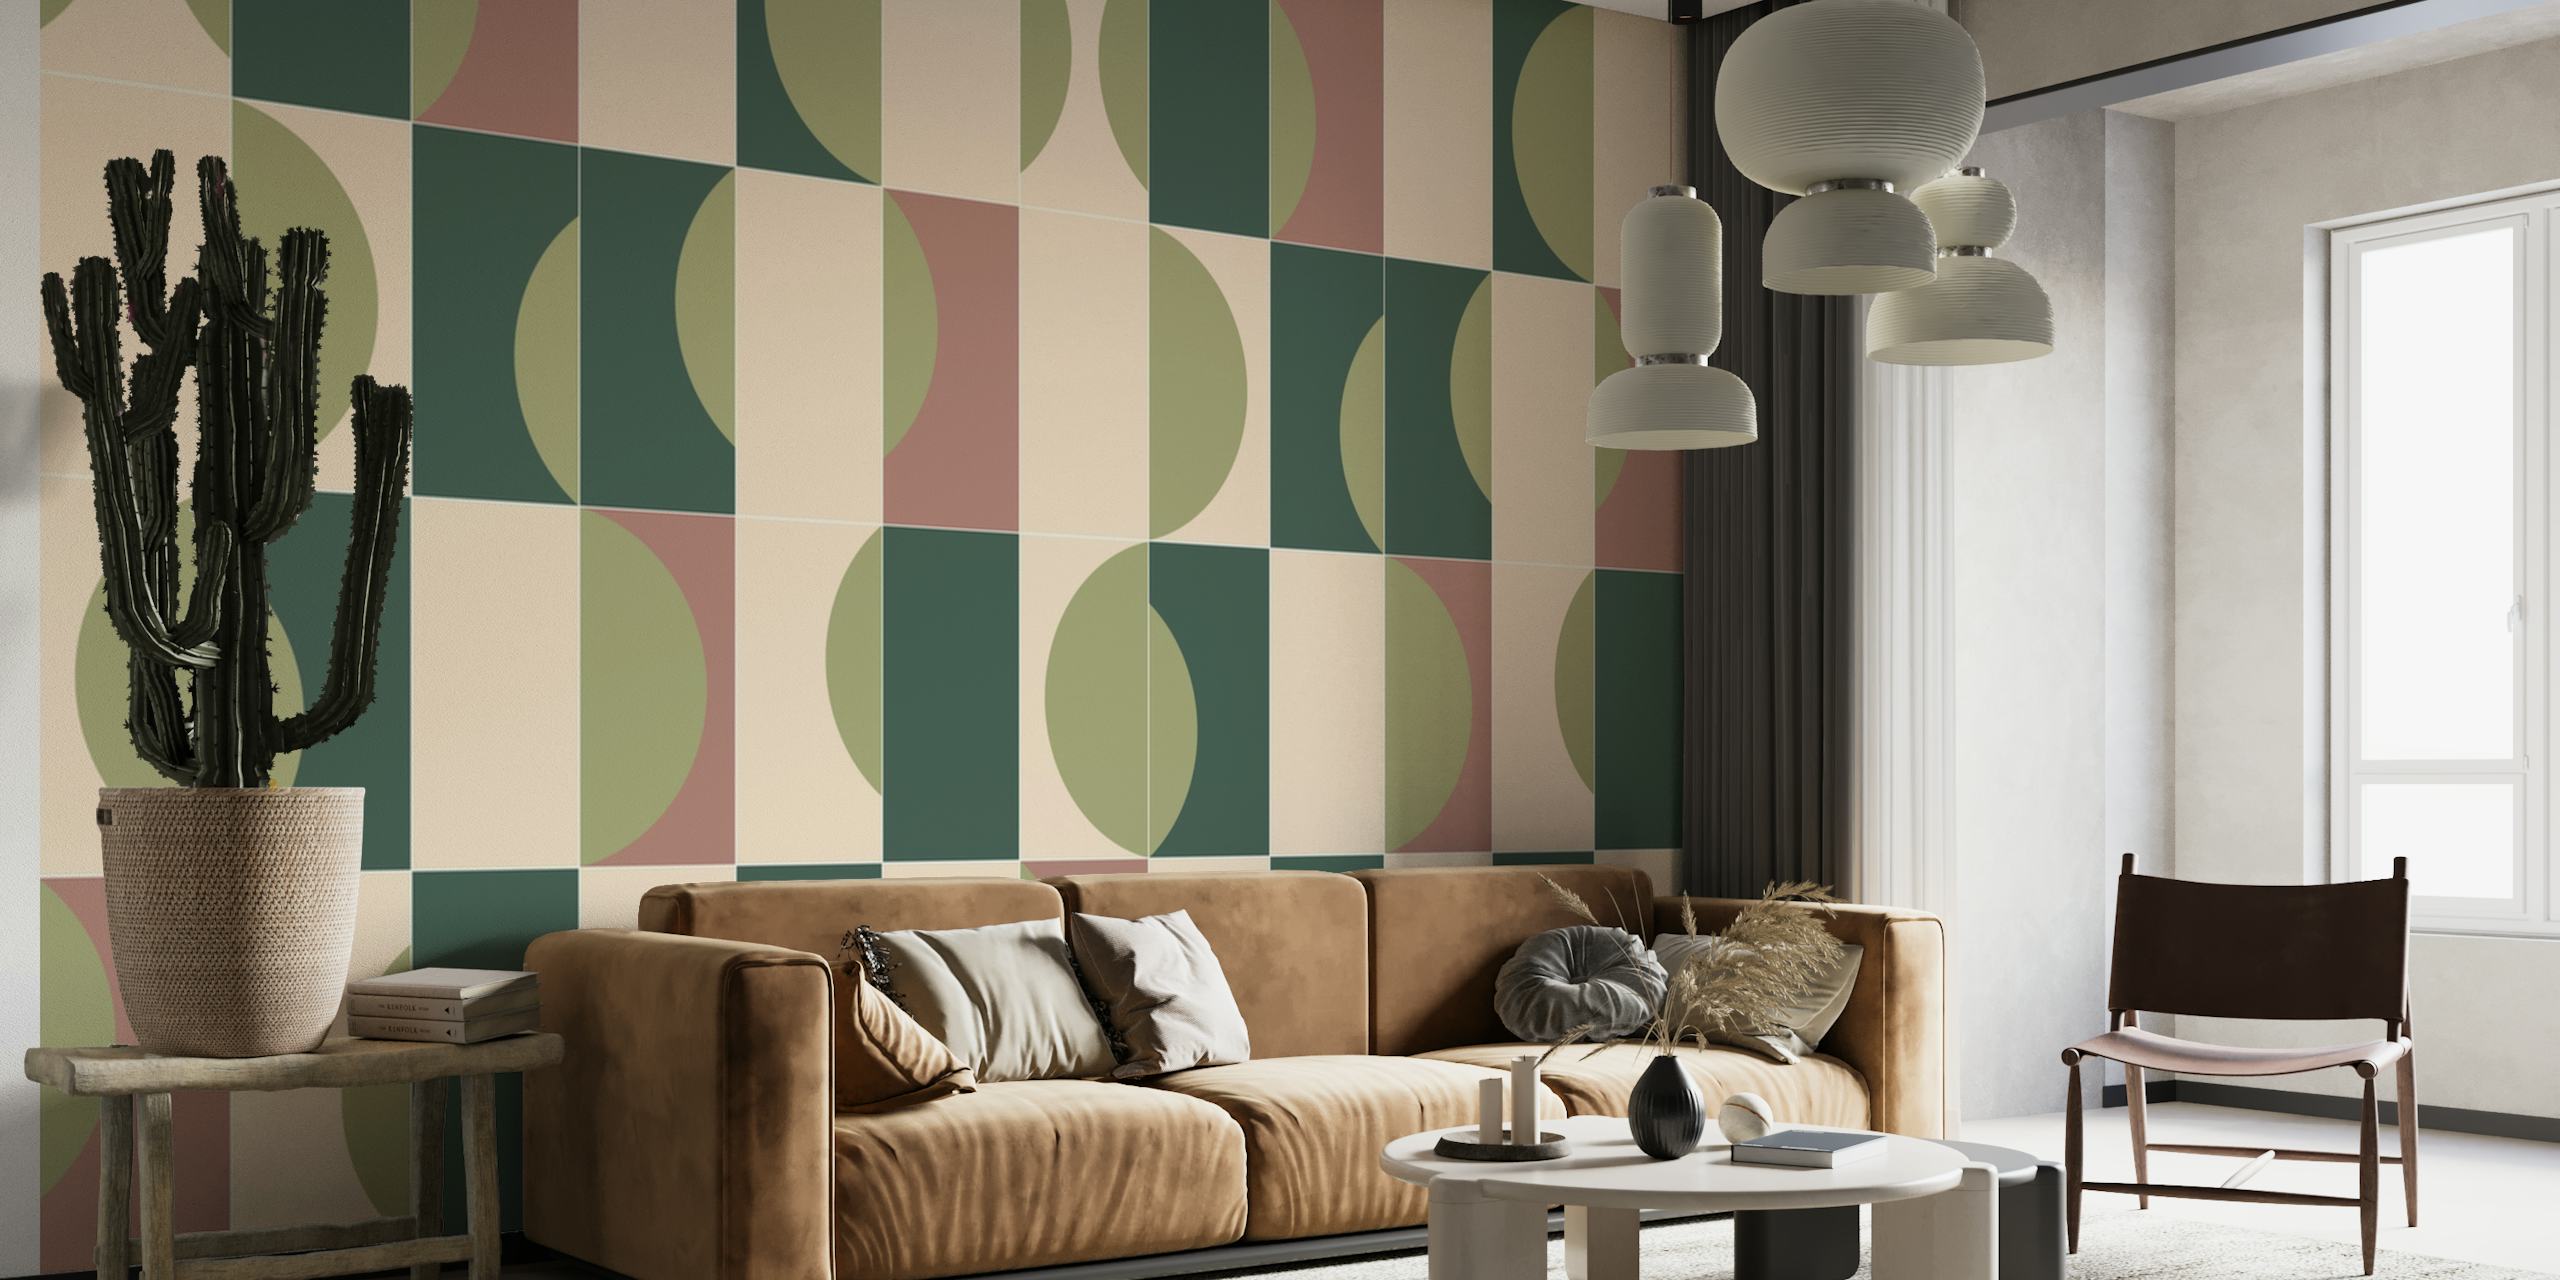 Abstract garden tiles pattern wall mural in earthy greens and neutral tones